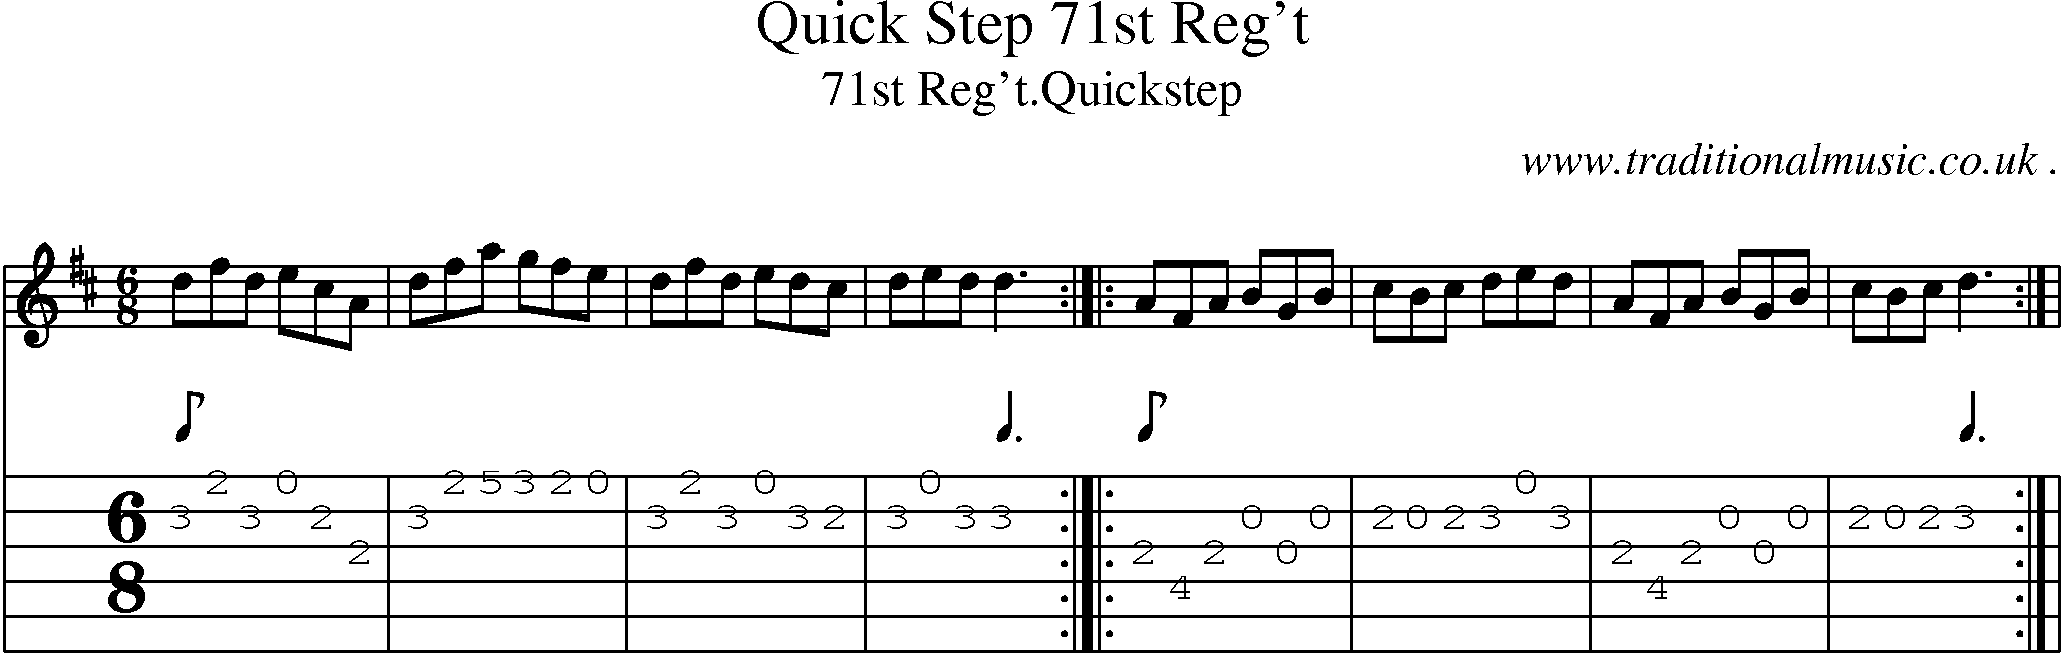 Sheet-Music and Guitar Tabs for Quick Step 71st Reg